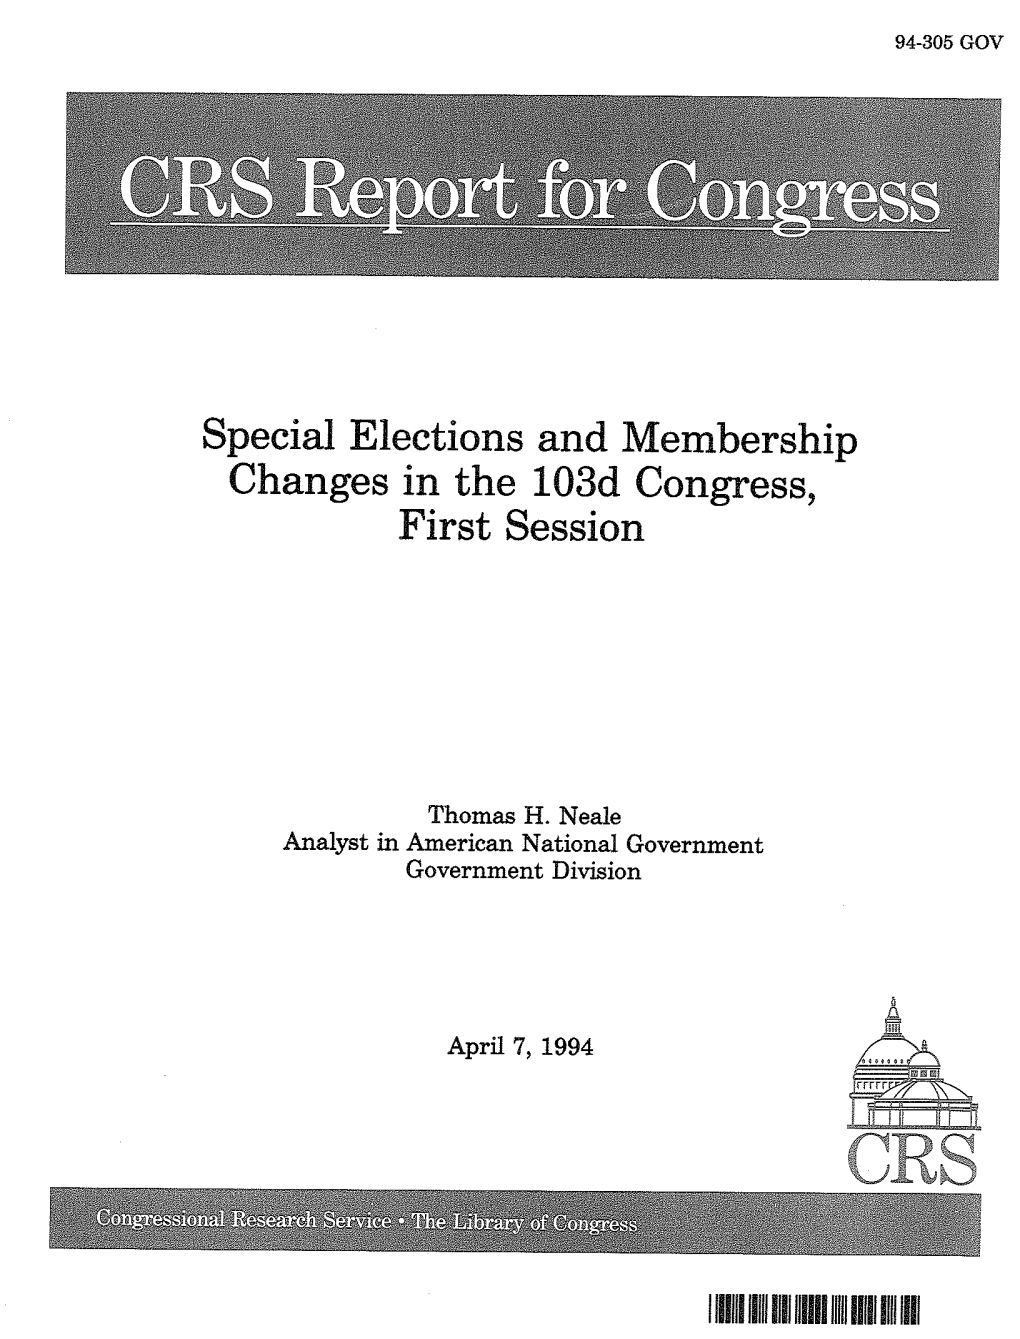 Special Elections and Membership Changes in the 103D Congress, First Session